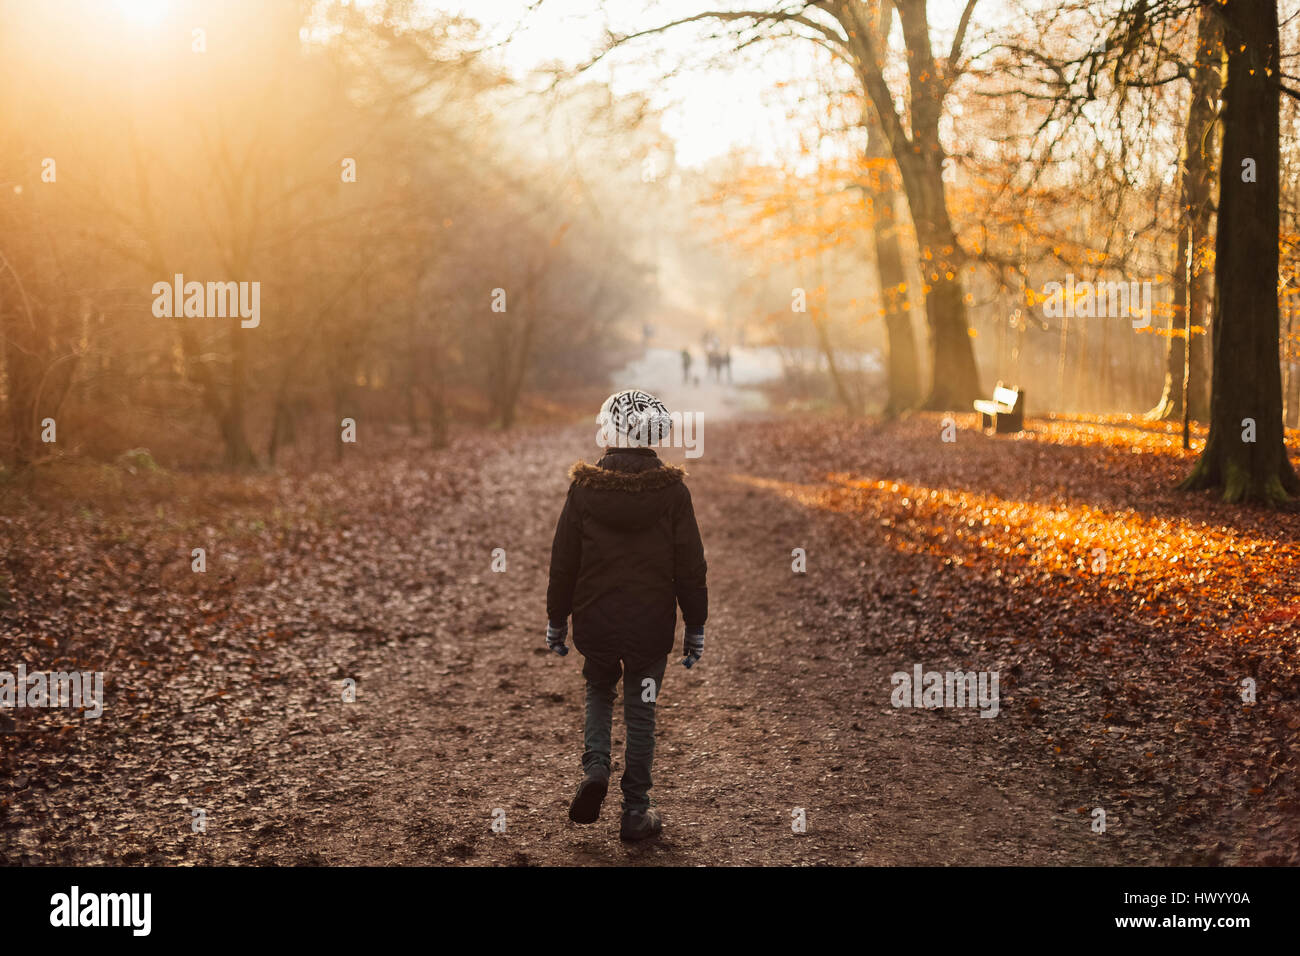 Boy walking through a sun drenched forest Stock Photo